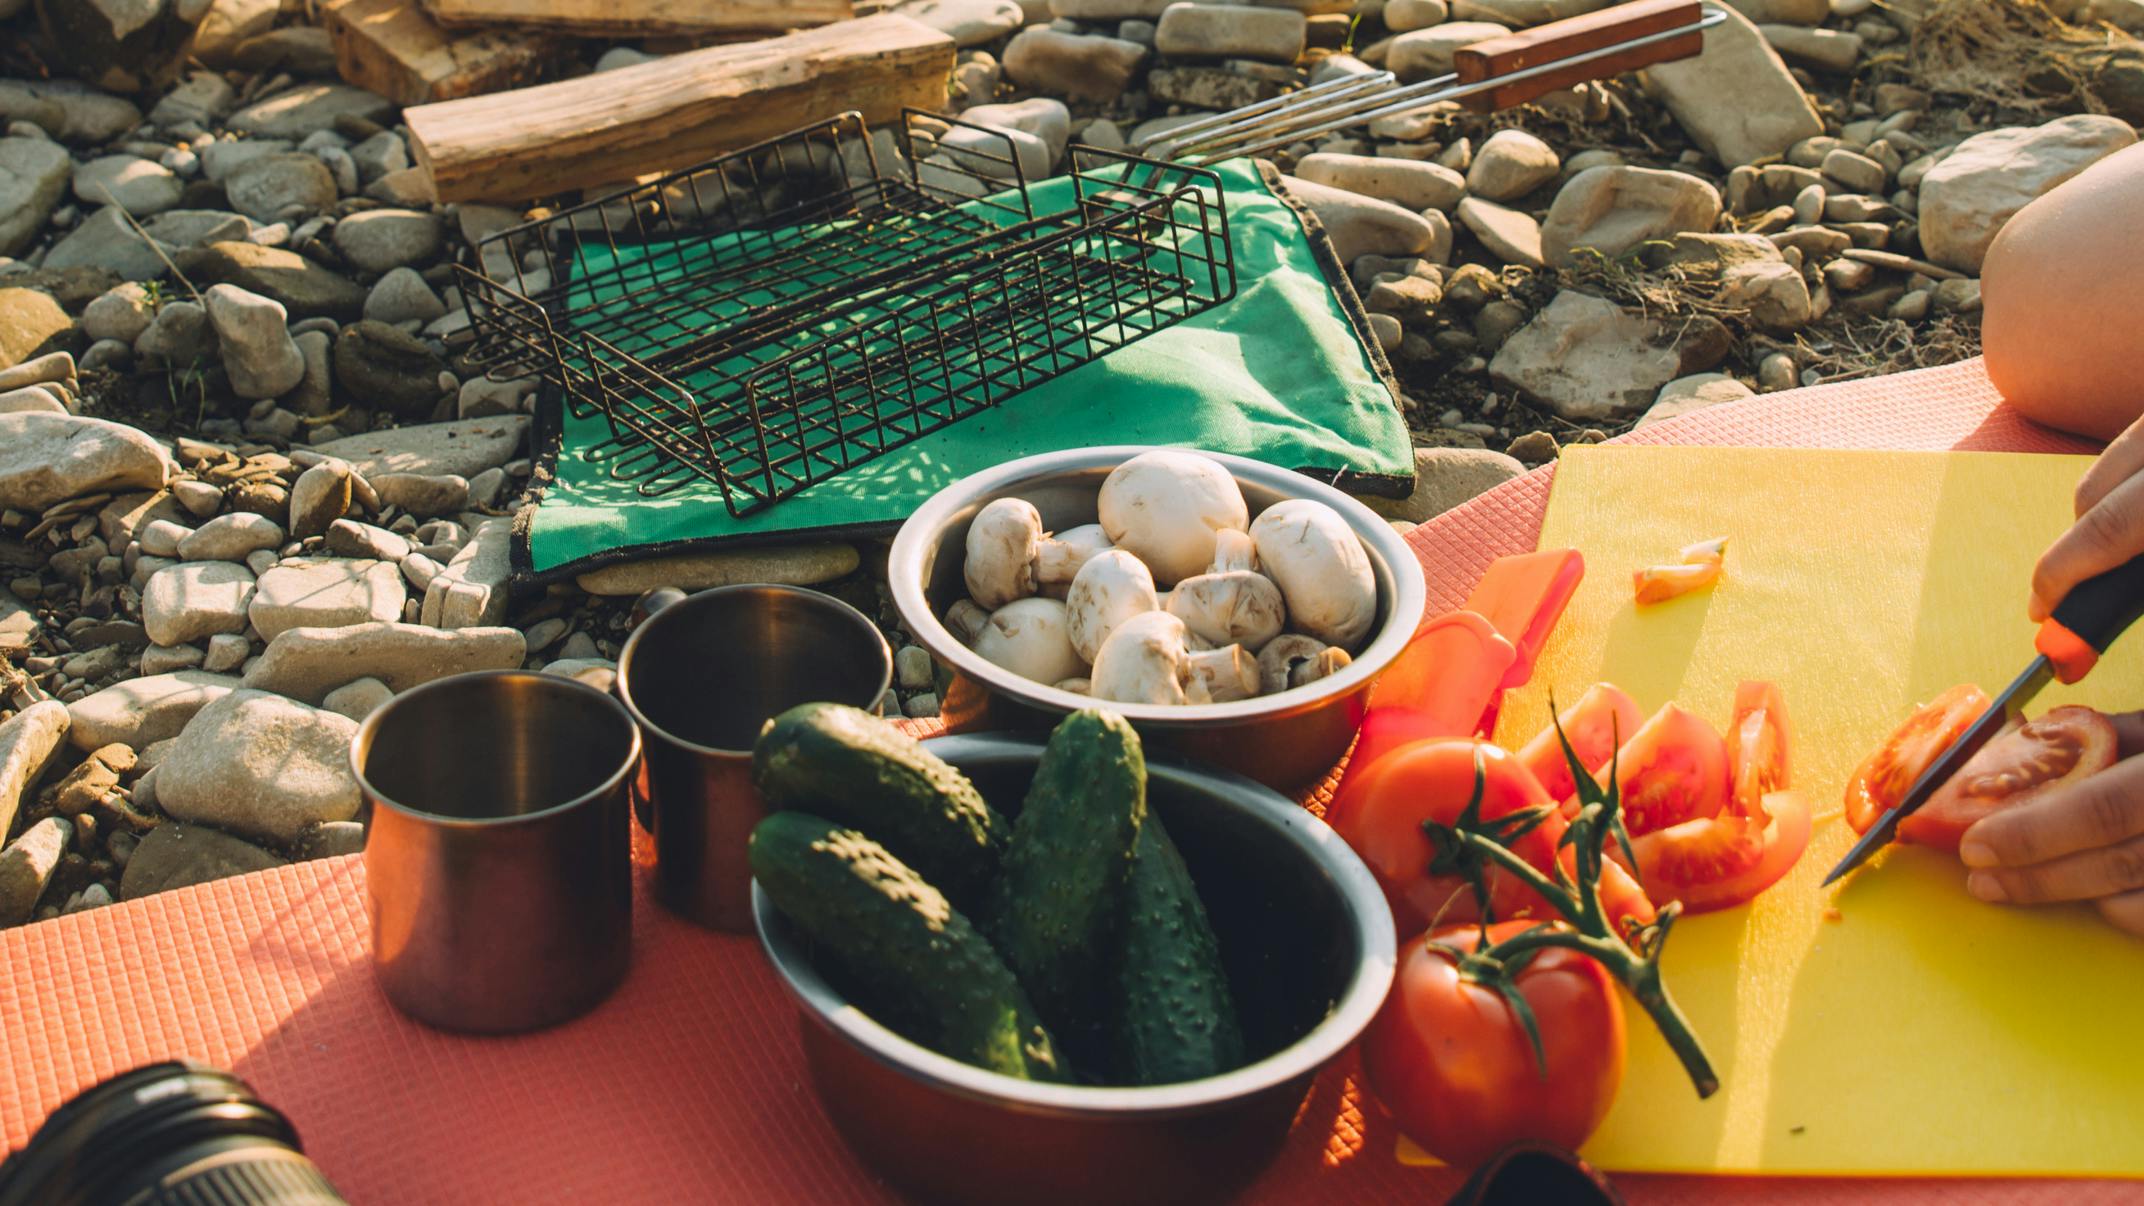 A person cuts up a tomato while sitting on a rocky surface. Two bowls full of pickles and mushrooms also sit there